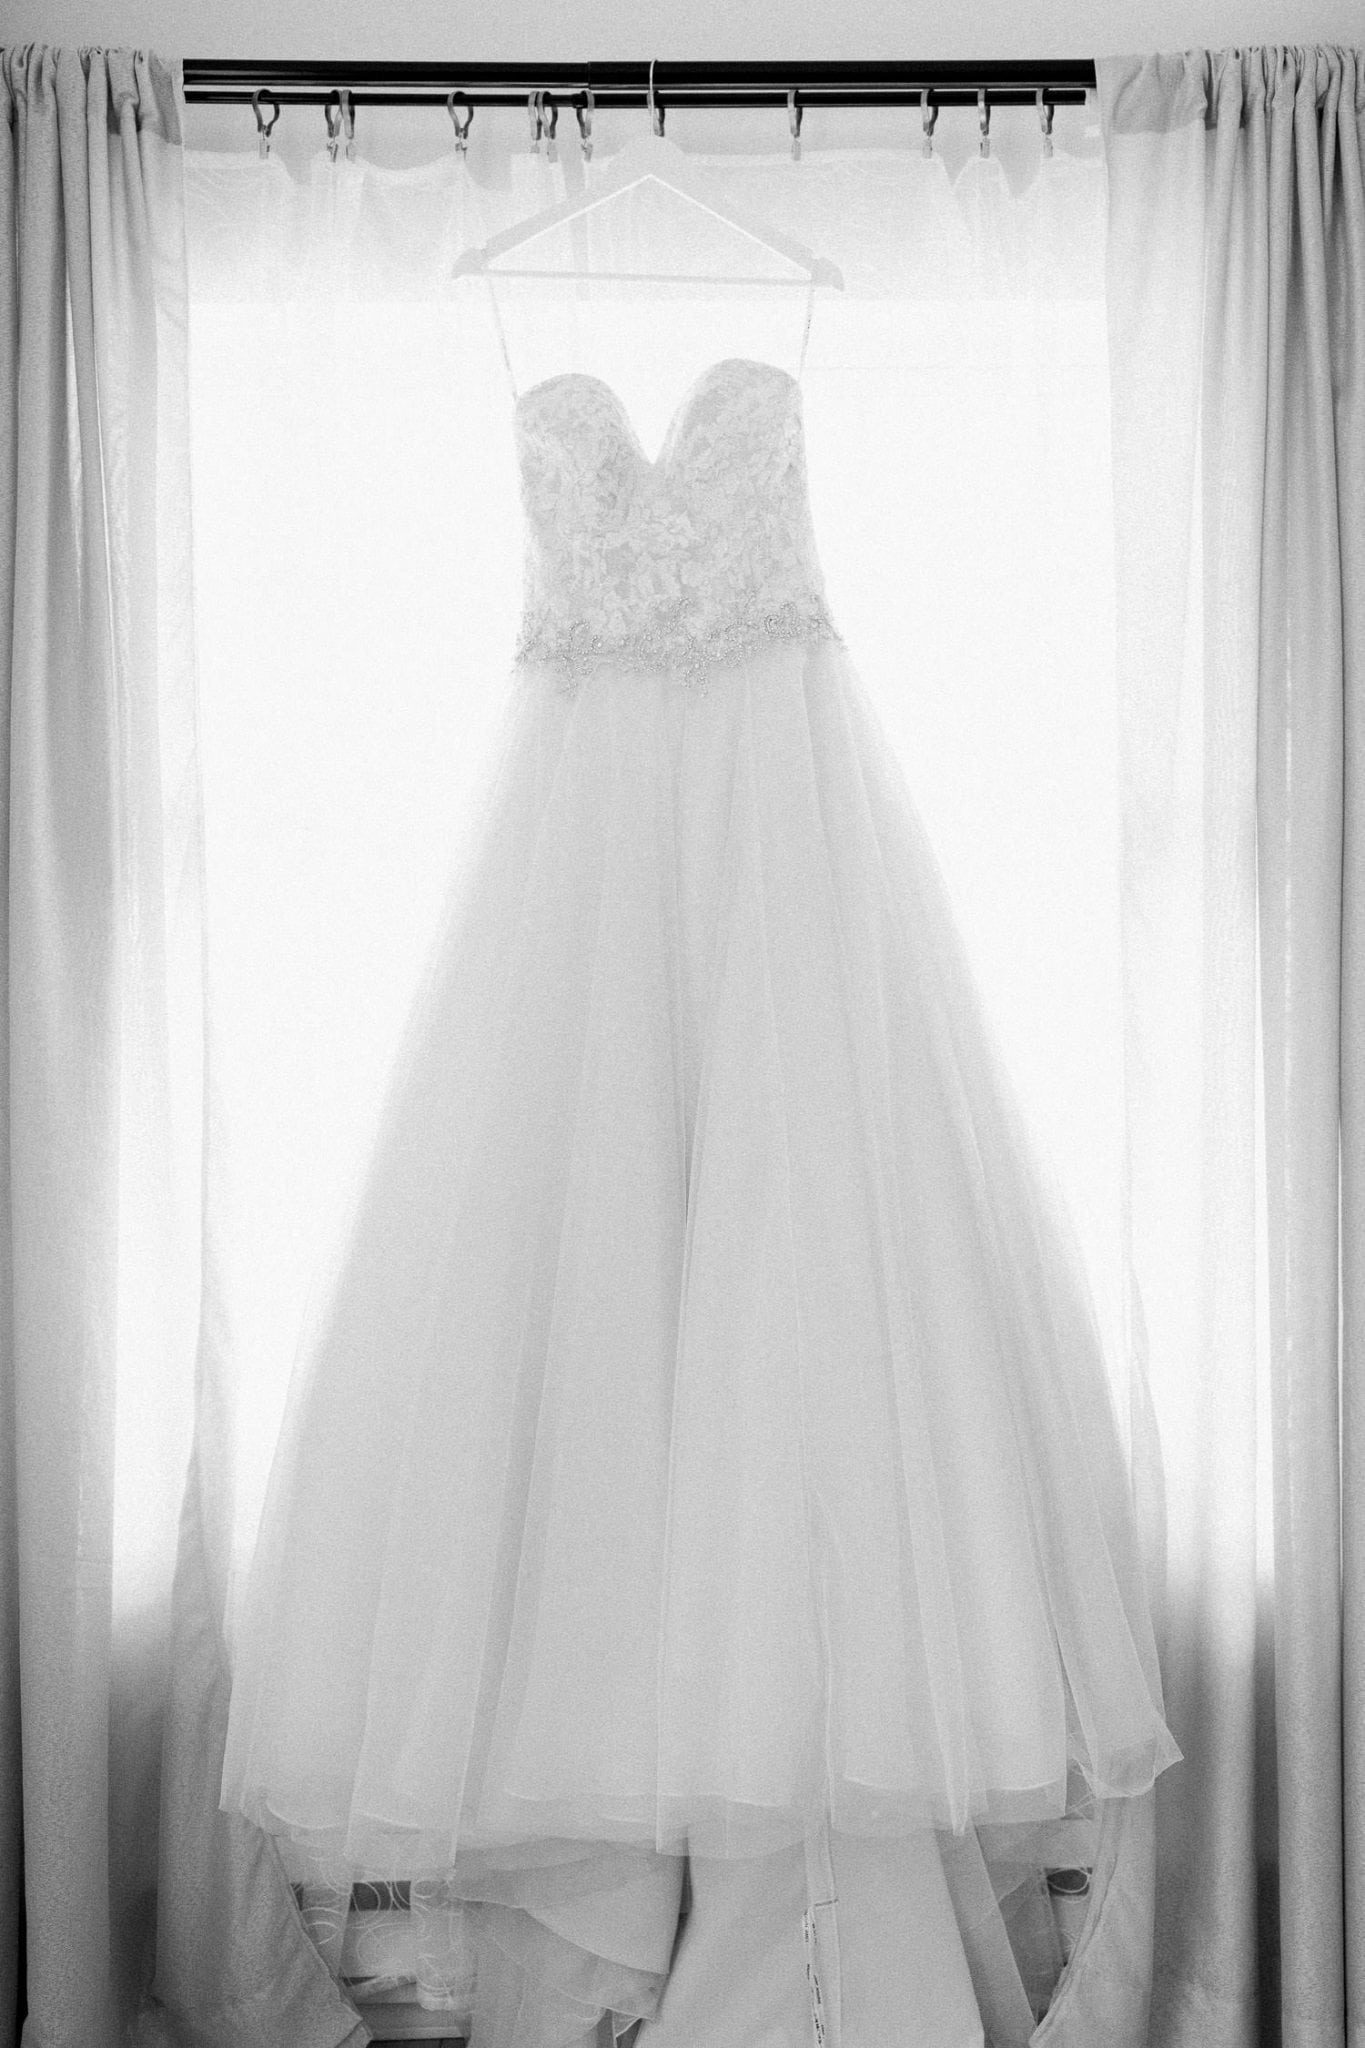 Picture of the wedding dress hanging in front of the window in b/w | Vancouver wedding photographer | Westwood Plateau Golf Club Wedding